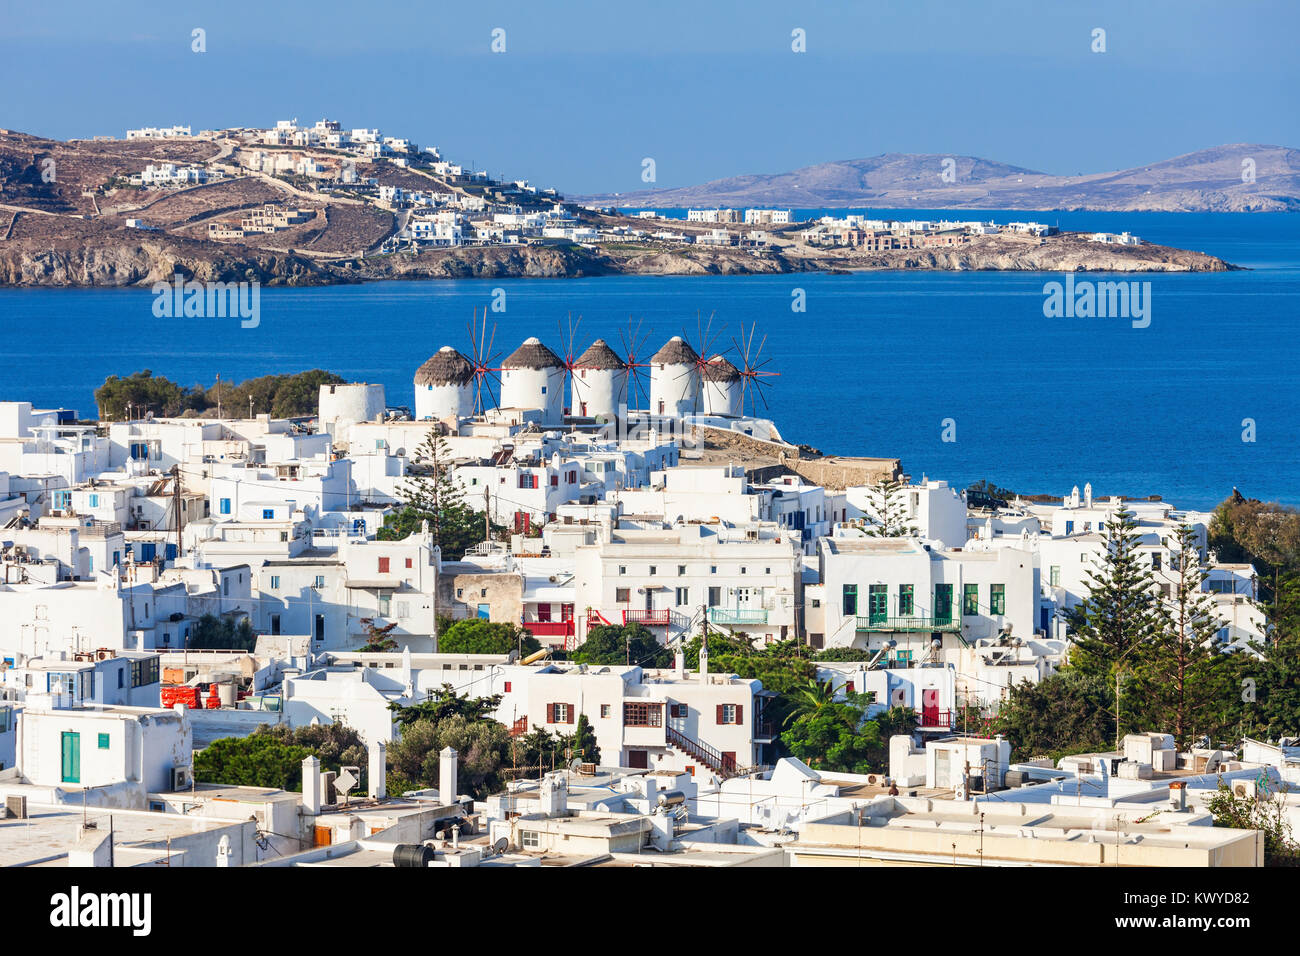 The Mykonos windmills are iconic feature of the Greek island of the Mykonos. The island is one of the Cyclades islands in the Aegean Sea, Greece. Stock Photo